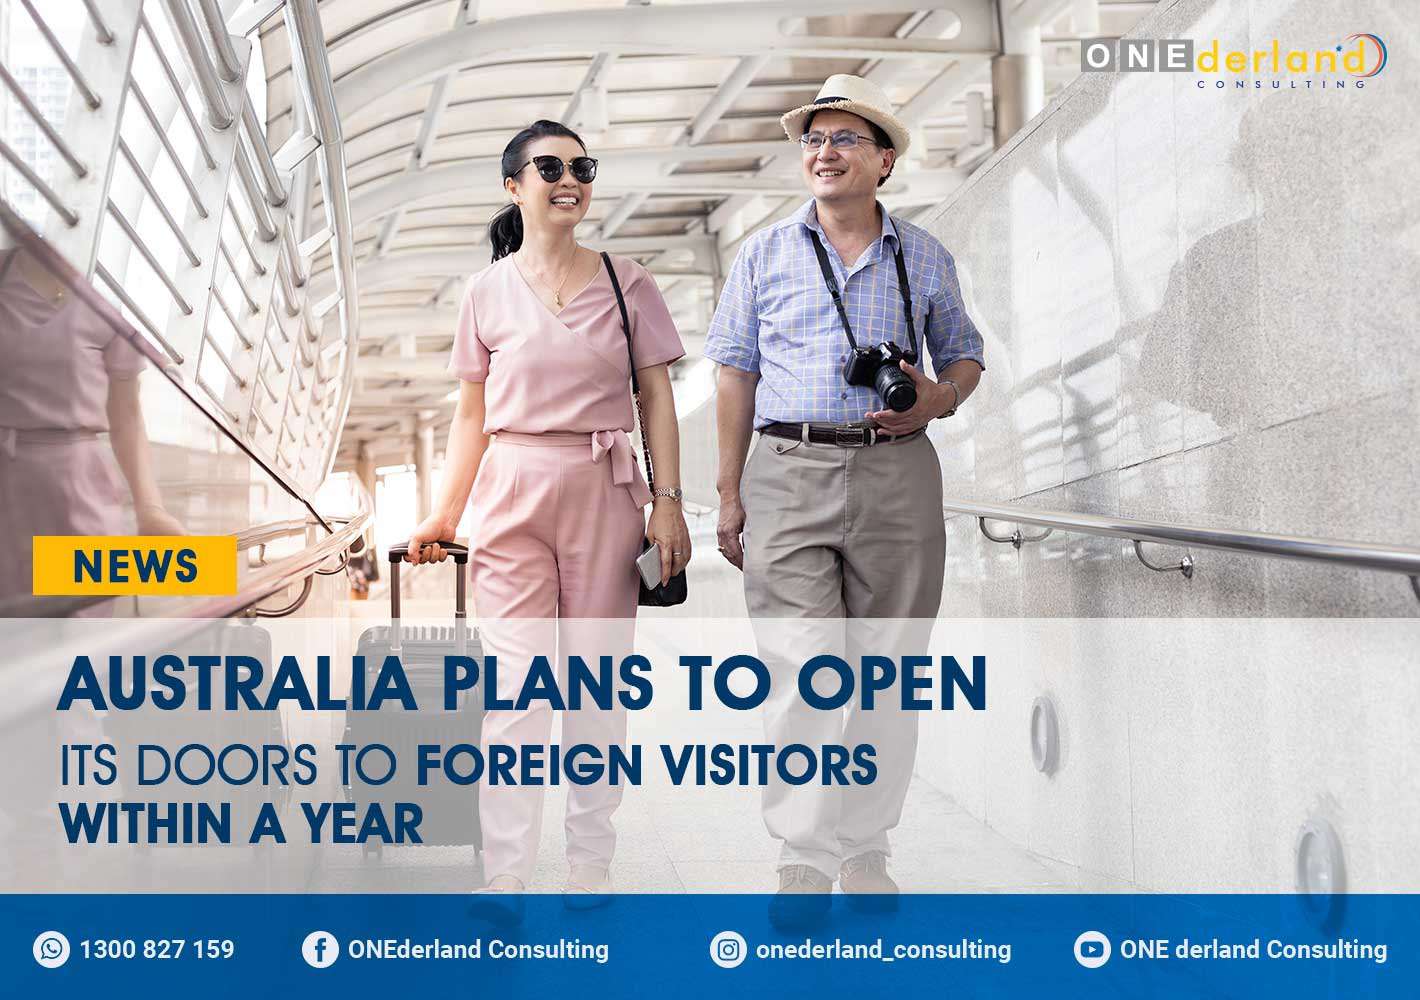 Australia Plans To Open Its Doors to Foreign Visitors Within A Year